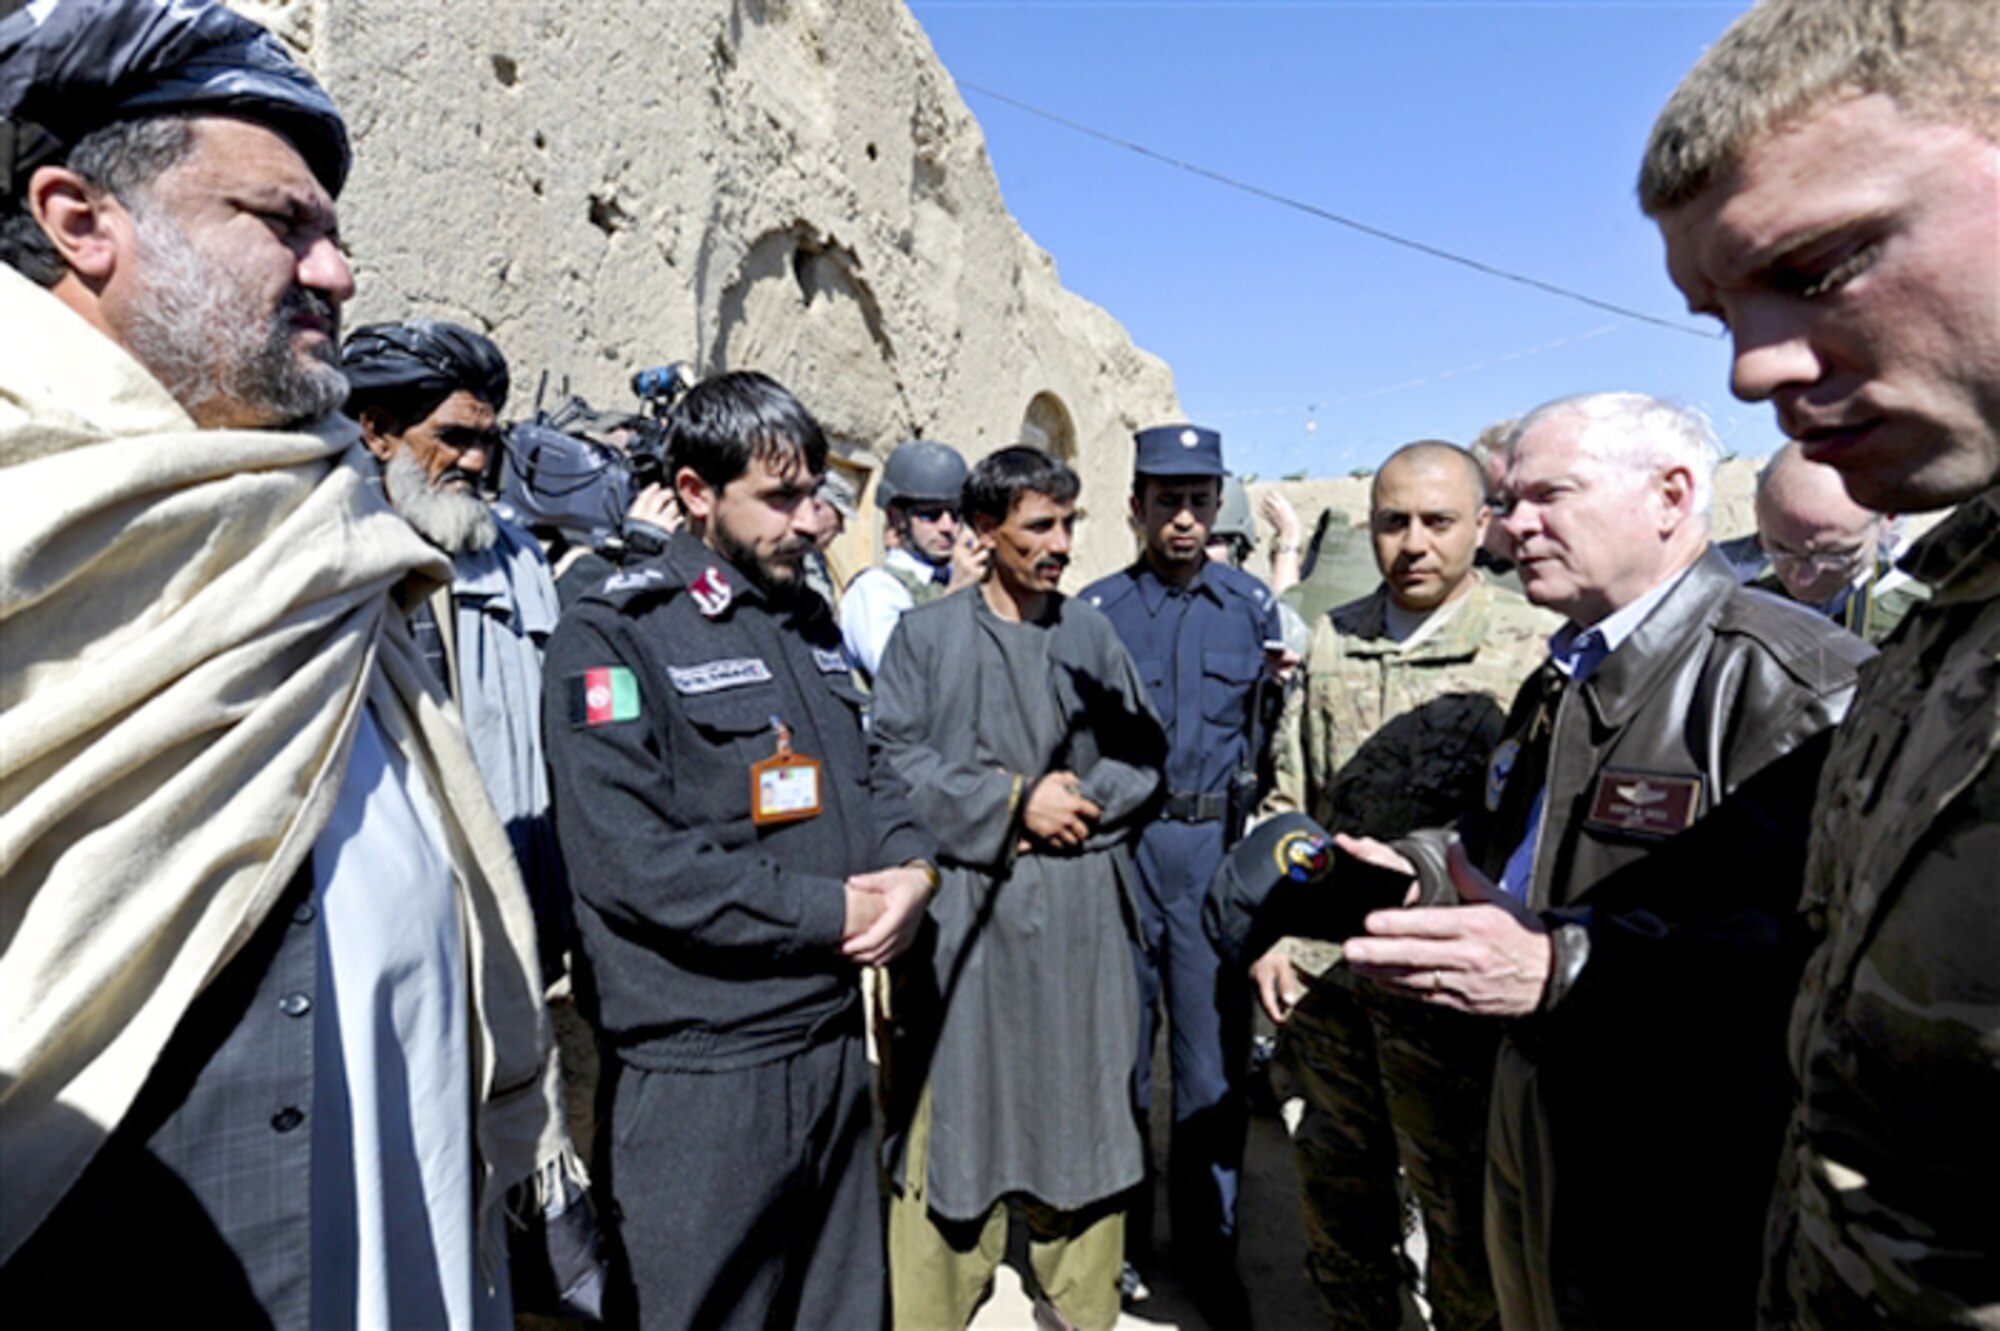 Defense Secretary Robert M. Gates (2nd from right) speaks with elders, members of the village council and the district police chief March 8, 2011, during a village visit outside Combat Outpost Kowall in southern Afghanistan. (Defense Department photo/Cherie Cullen)